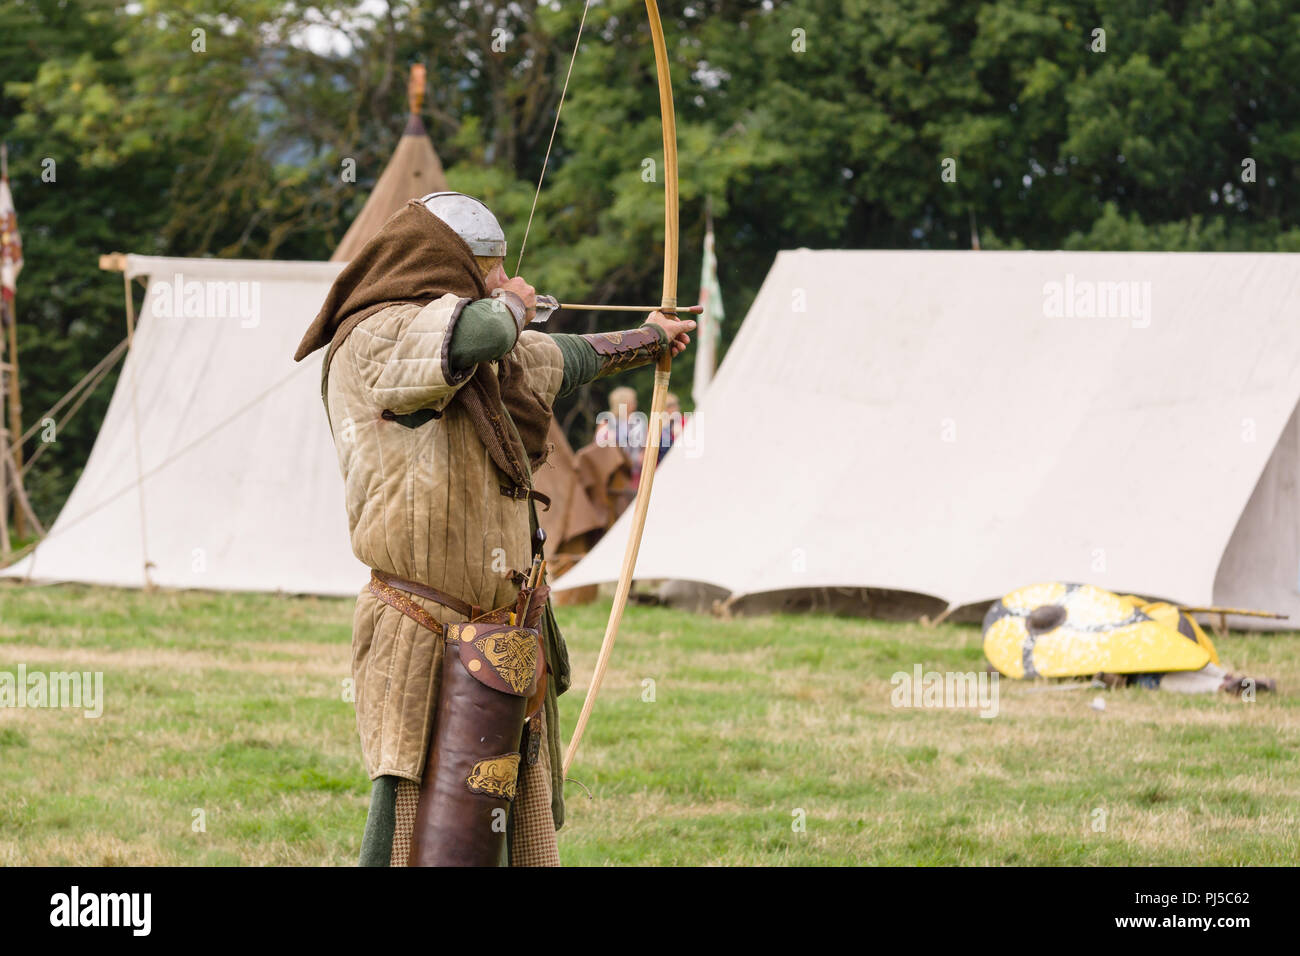 Medieval battle re-enactment showing archers of the Cwmwd Ial society re-enacting the battle of Crogen 1165 in Chirk North Wales 2018 Stock Photo